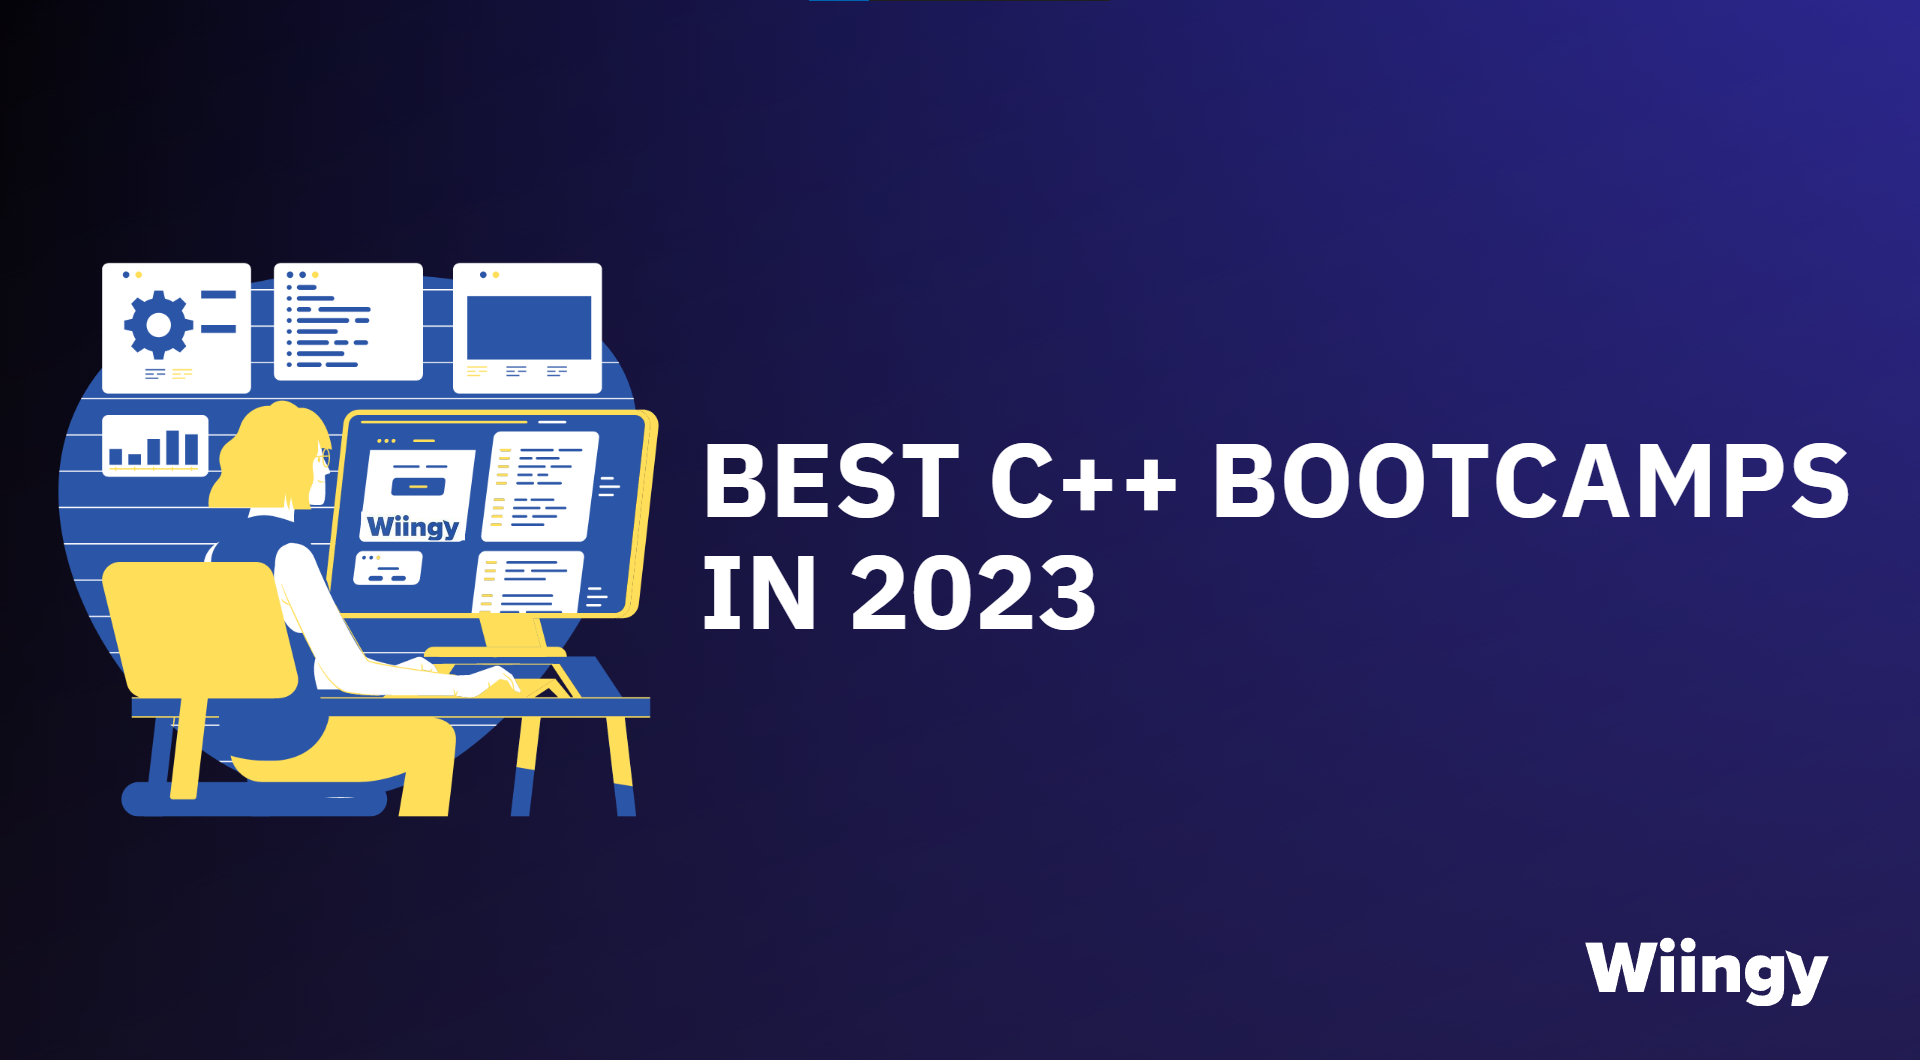 c++ bootcamps